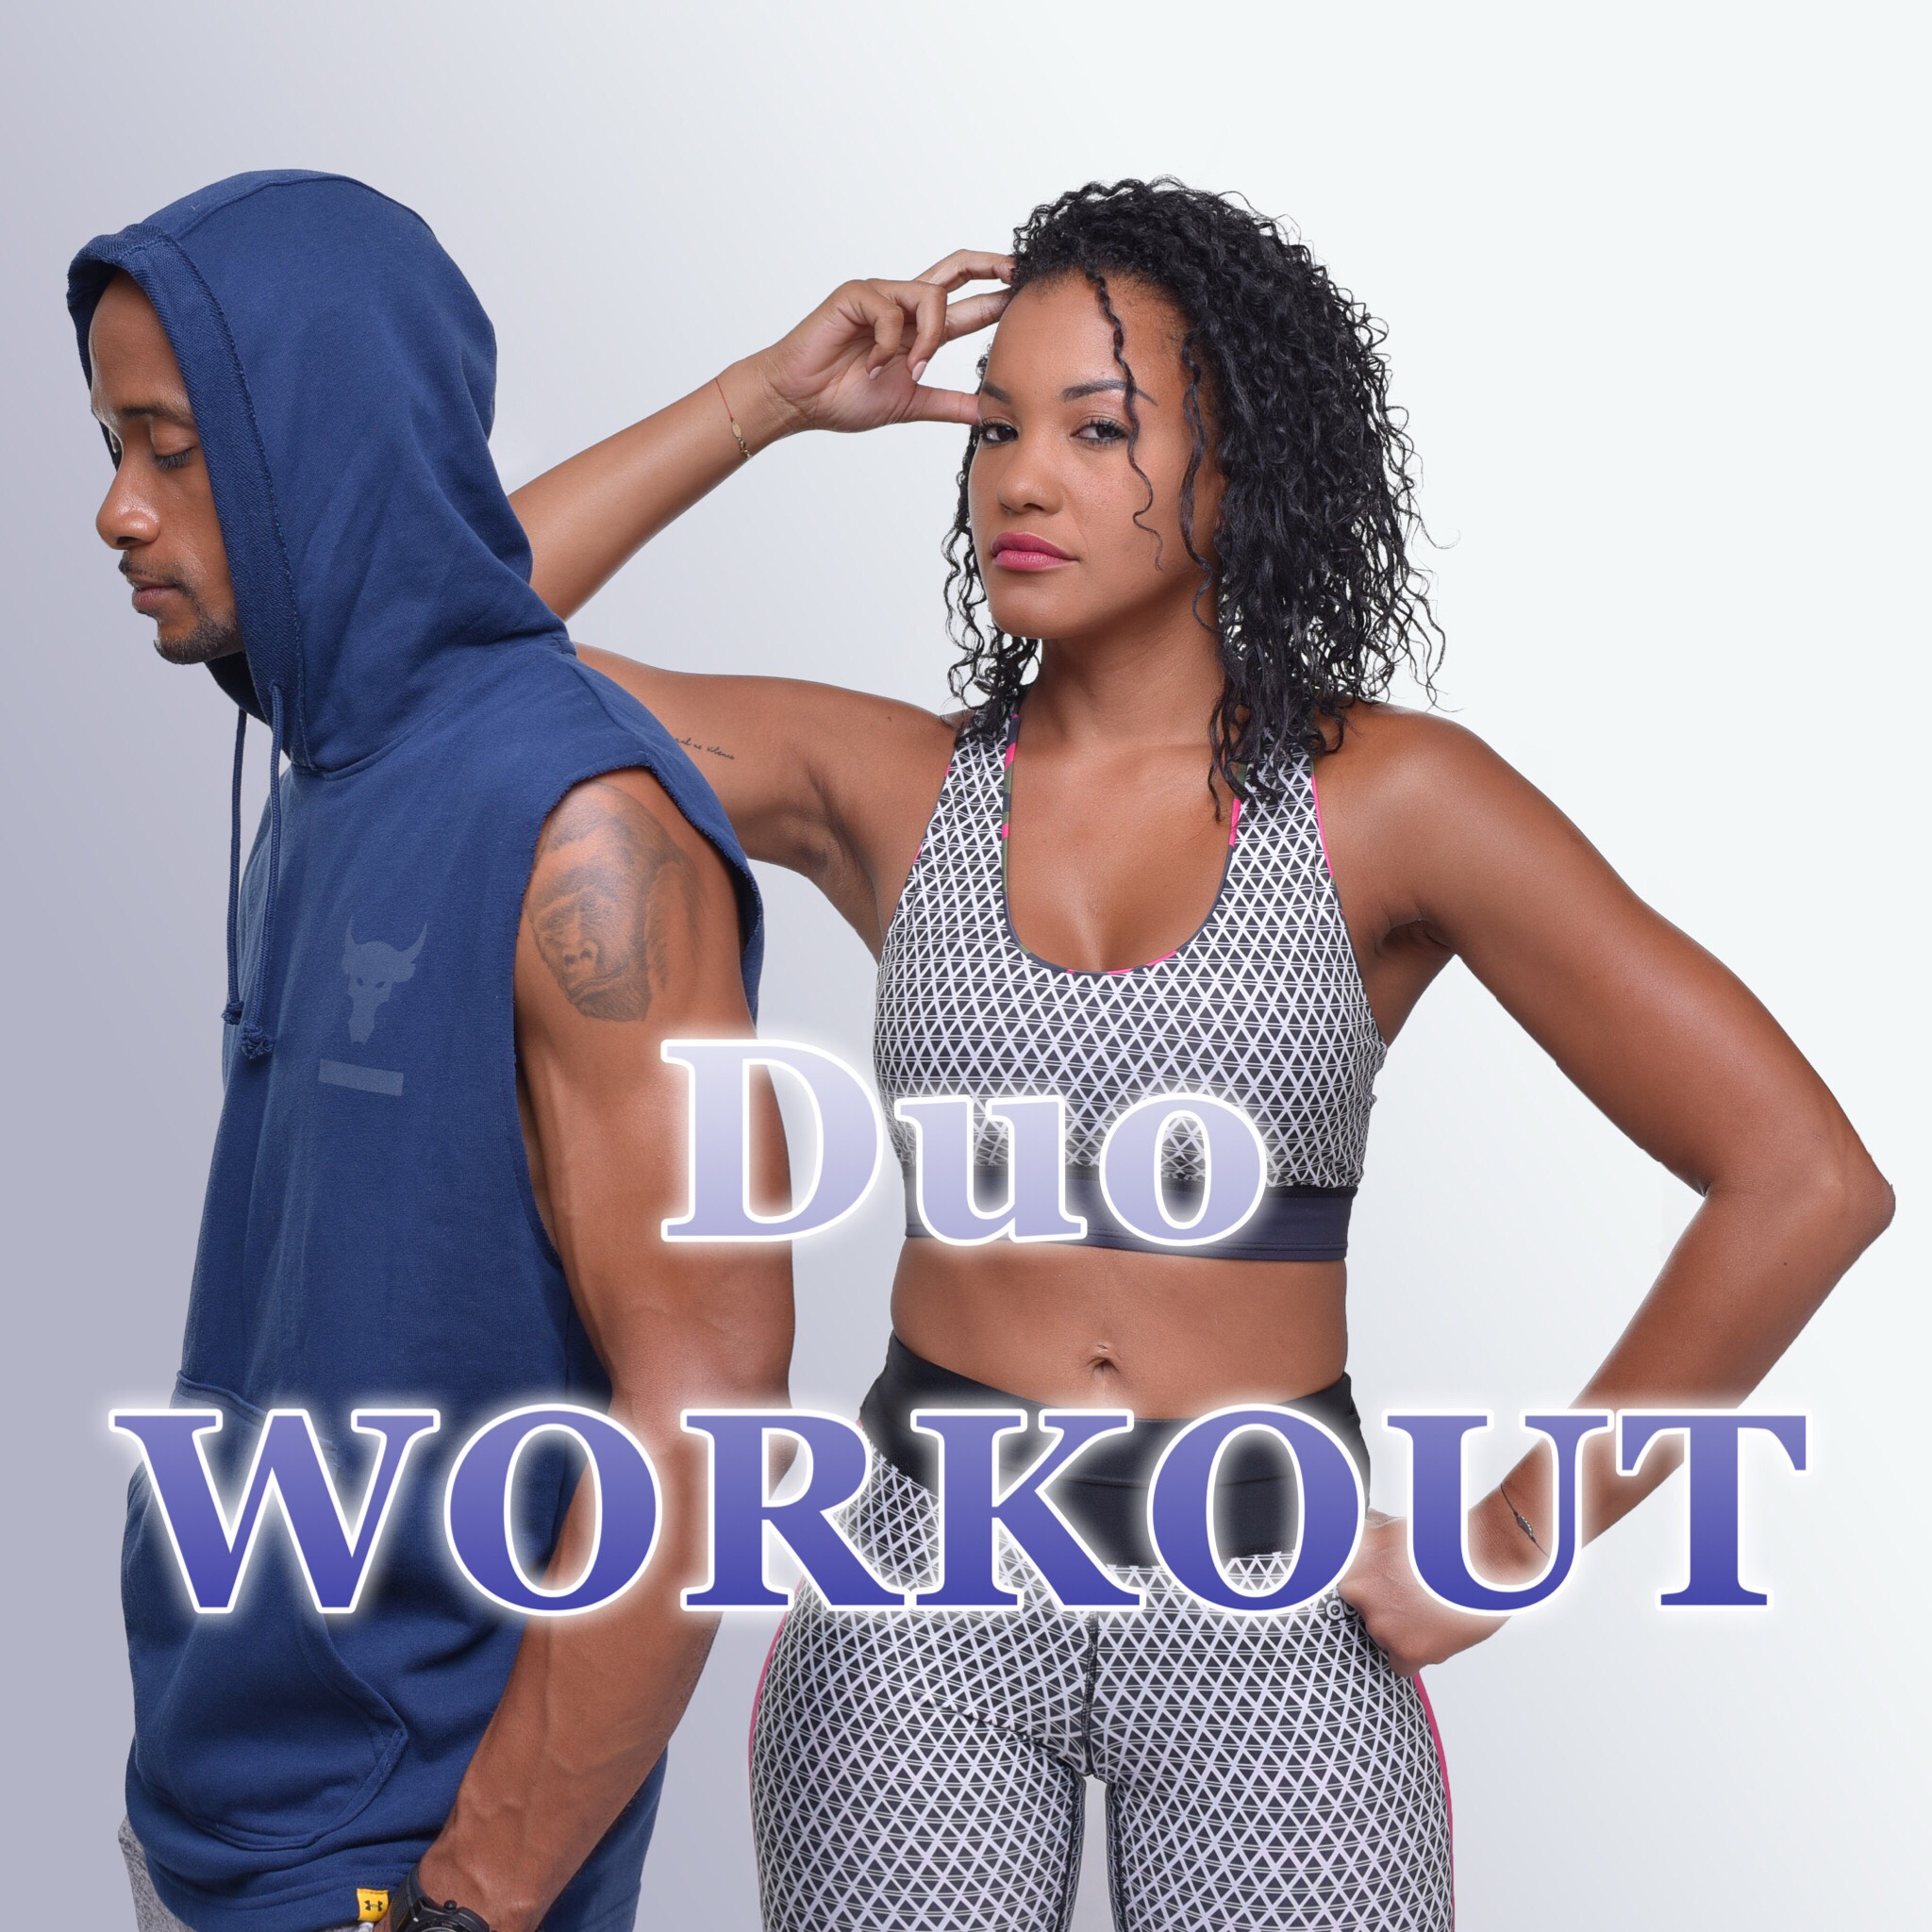 Duo workout